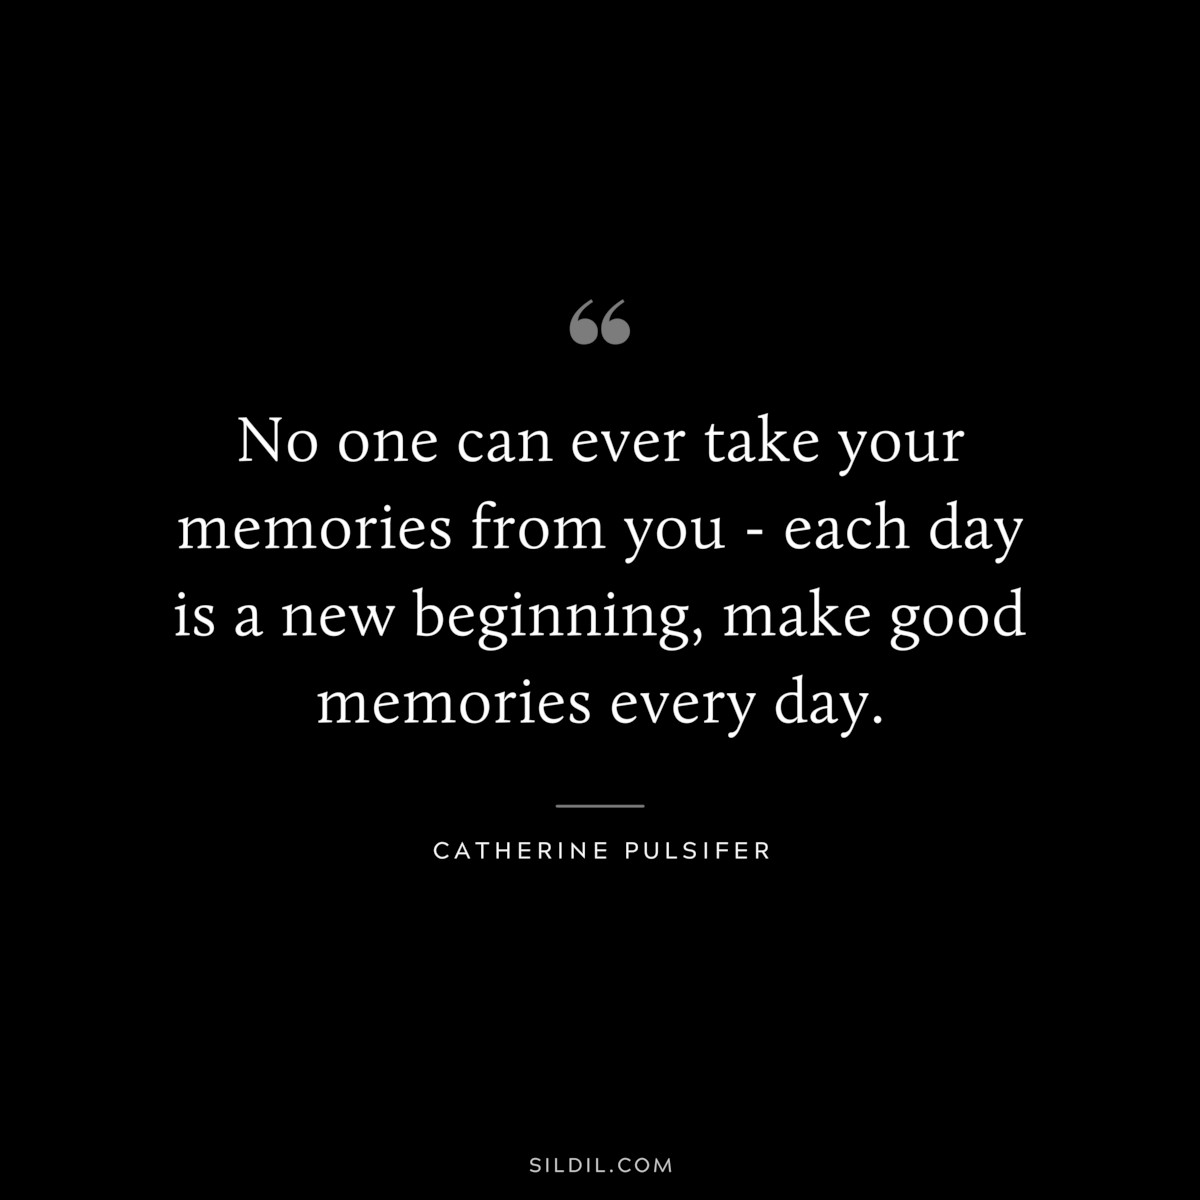 No one can ever take your memories from you - each day is a new beginning, make good memories every day. ― Catherine Pulsifer